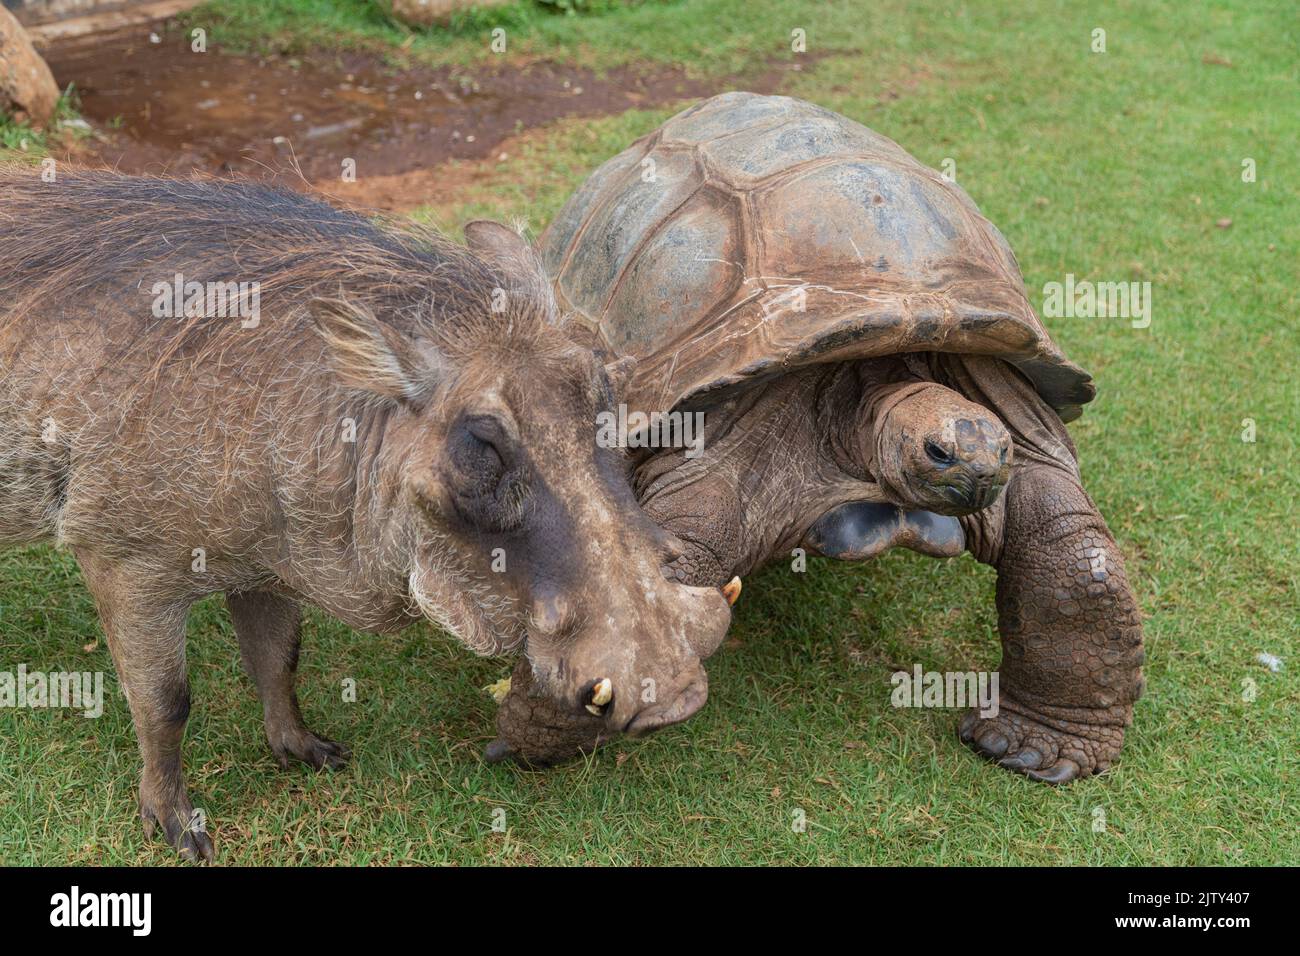 Unlikely friends warthog and giant tortoise Stock Photo